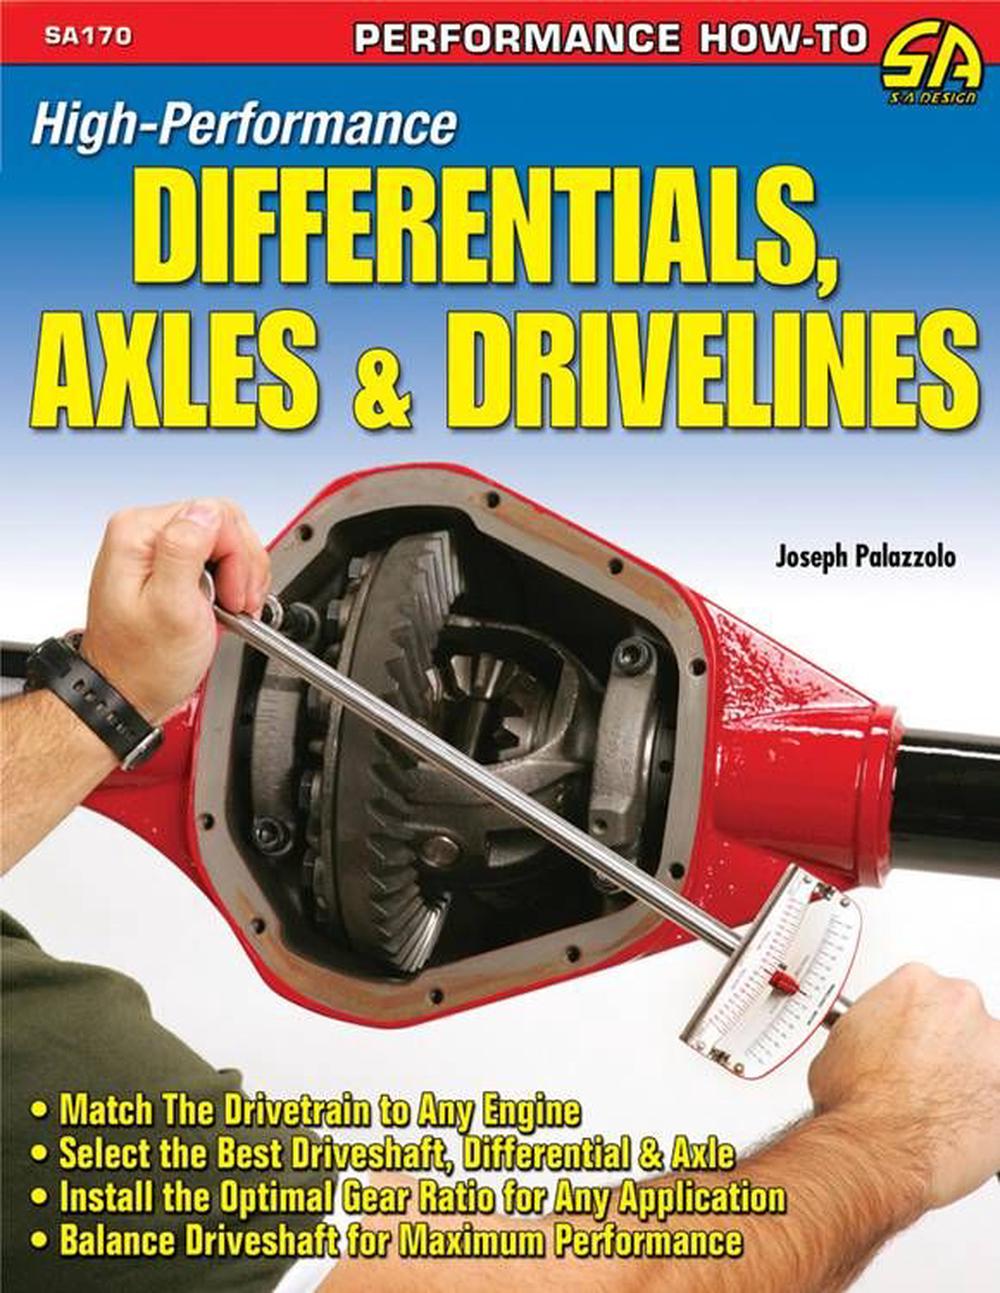 HighPerformance Differentials, Axels, & Drivelines by Joseph Palazzolo (English 9781934709023